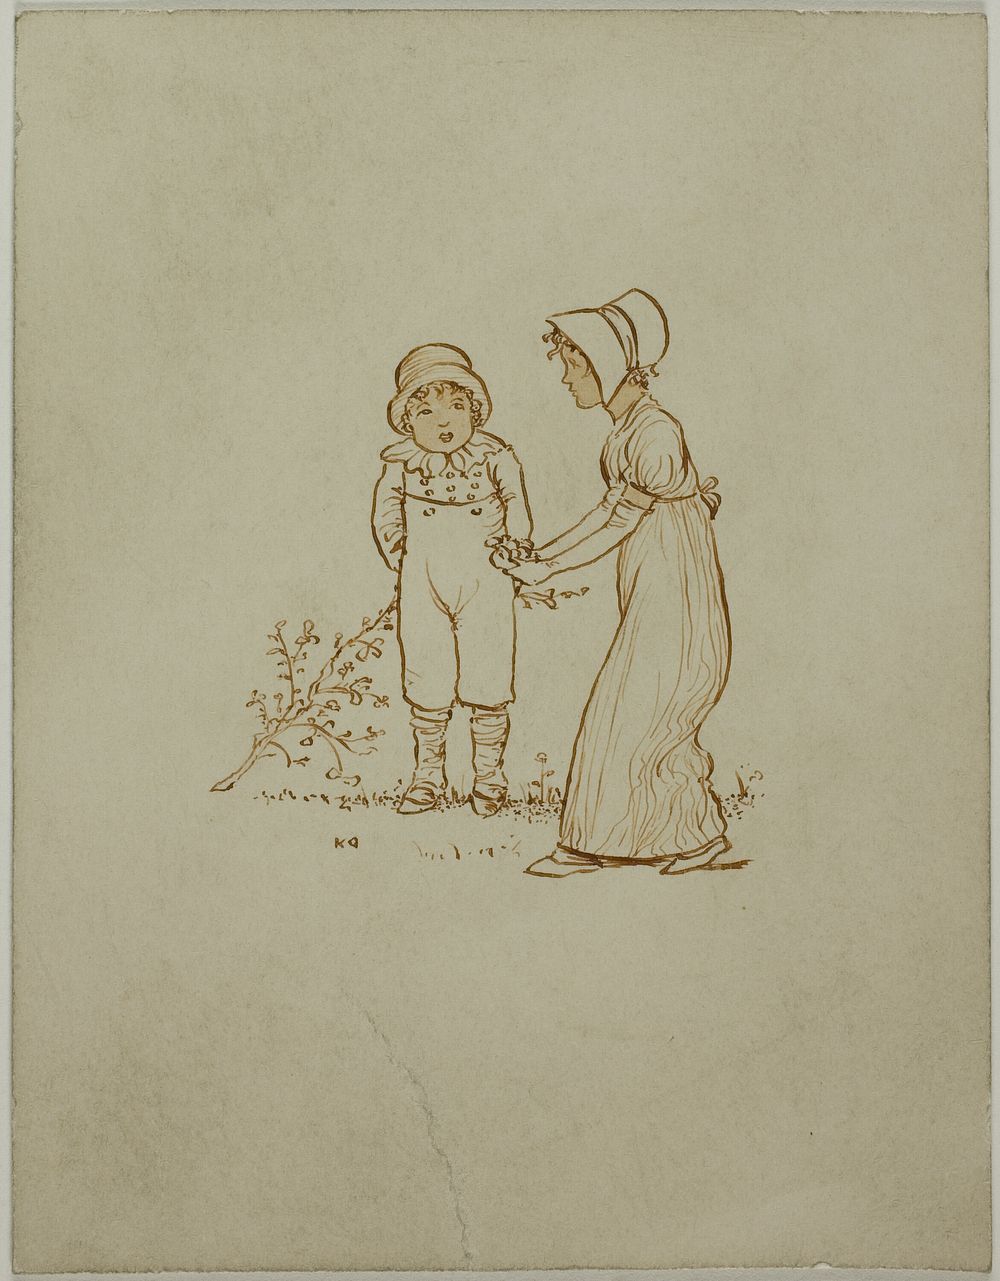 Little Boy and Girl by Kate Greenaway